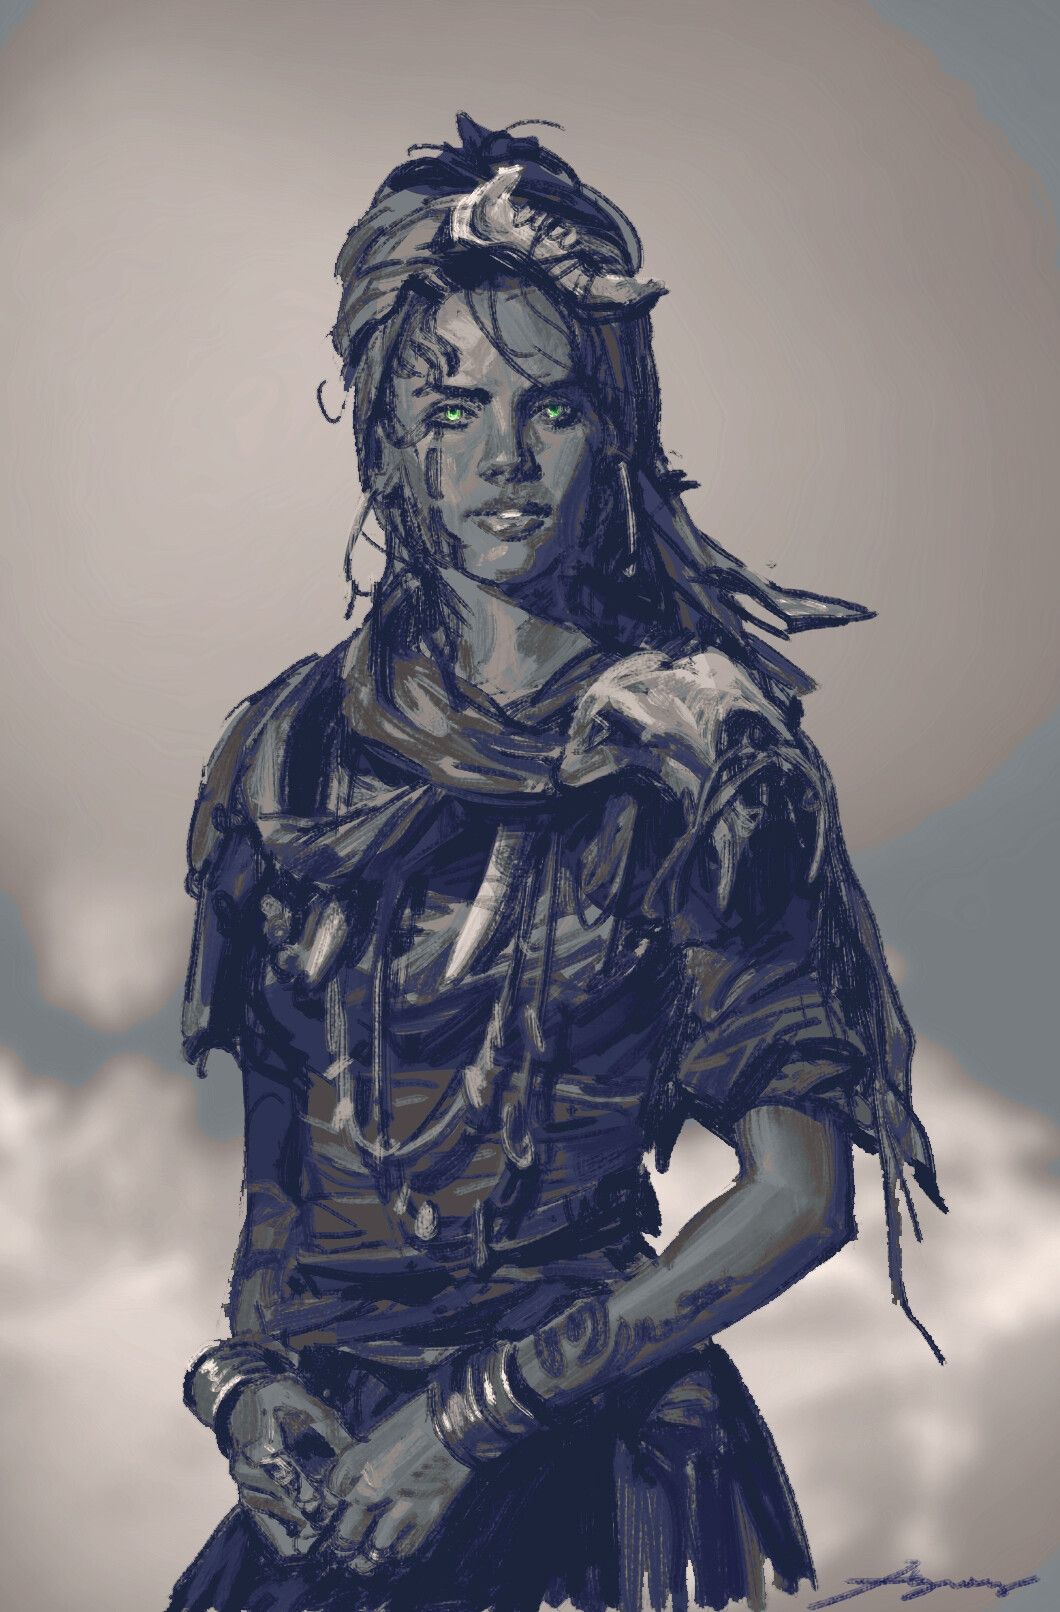 Fantasy concept art from Naughty Dog employee